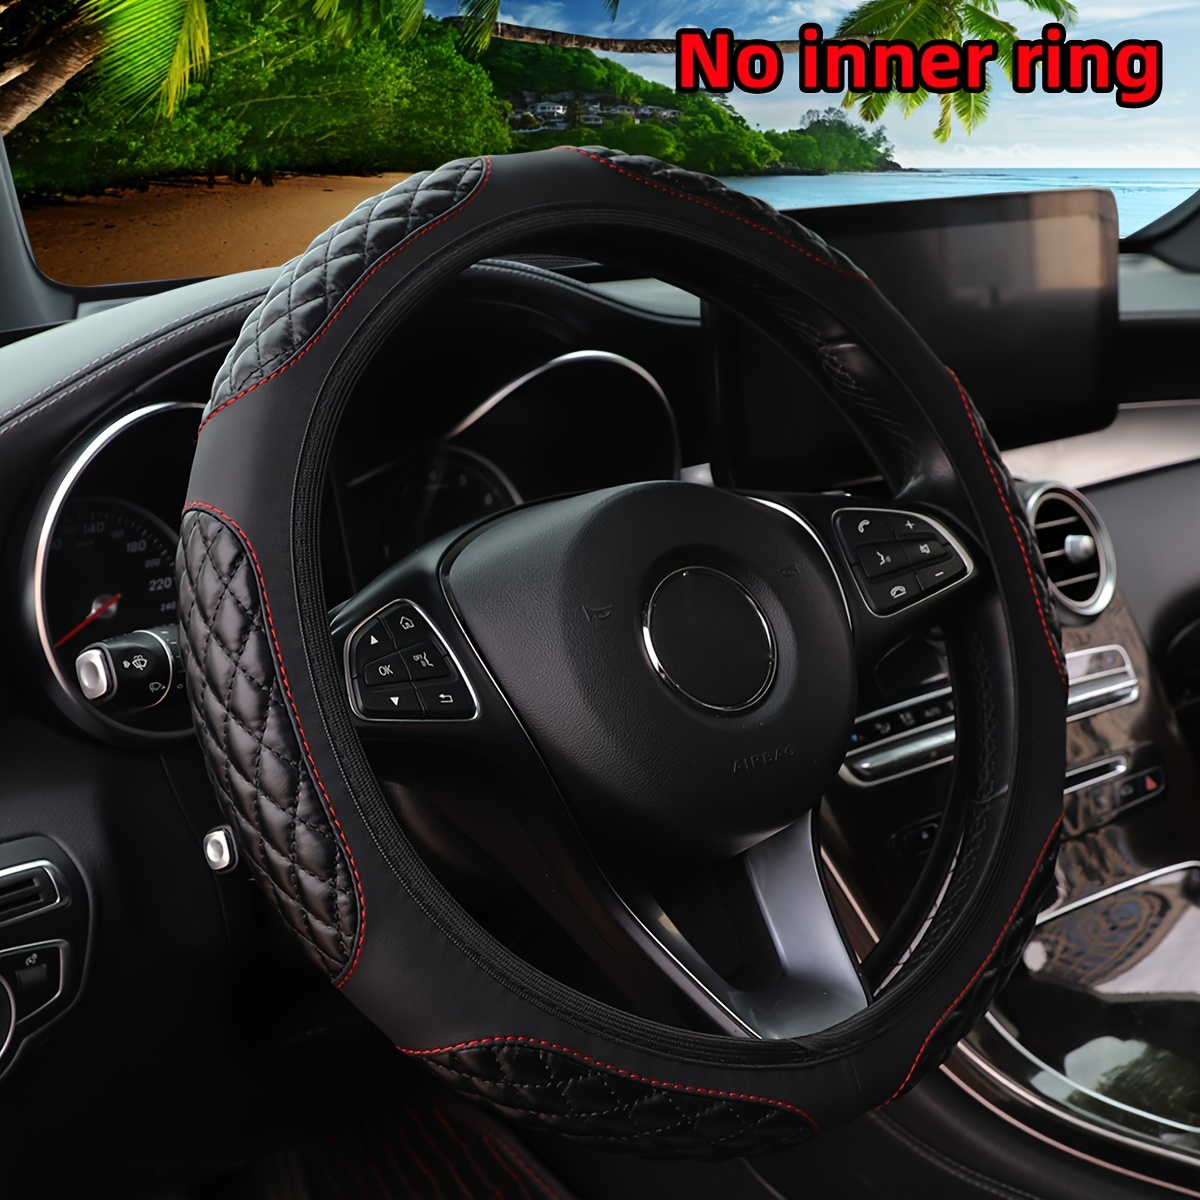 

Pu Leather Steering Wheel Cover - Soft Comfort Embroidered No Inner Circle - Universal Fit For 14.5-15 Inch Steering Wheels